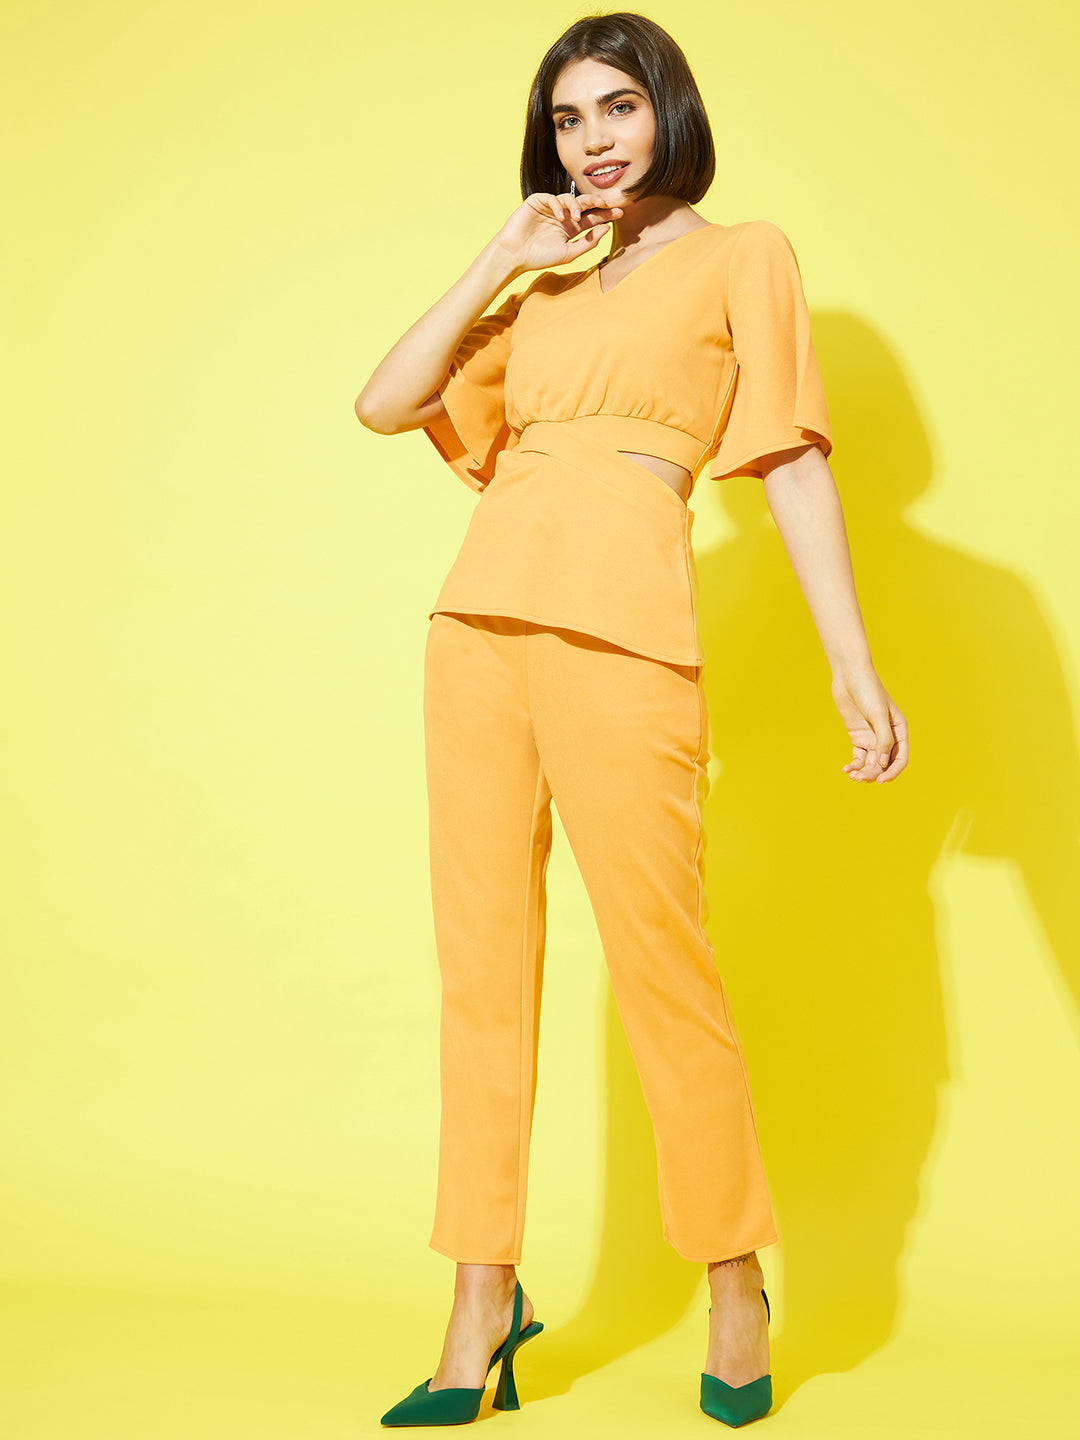 Mustard Yellow Trousers  Buy Mustard Yellow Trousers online in India